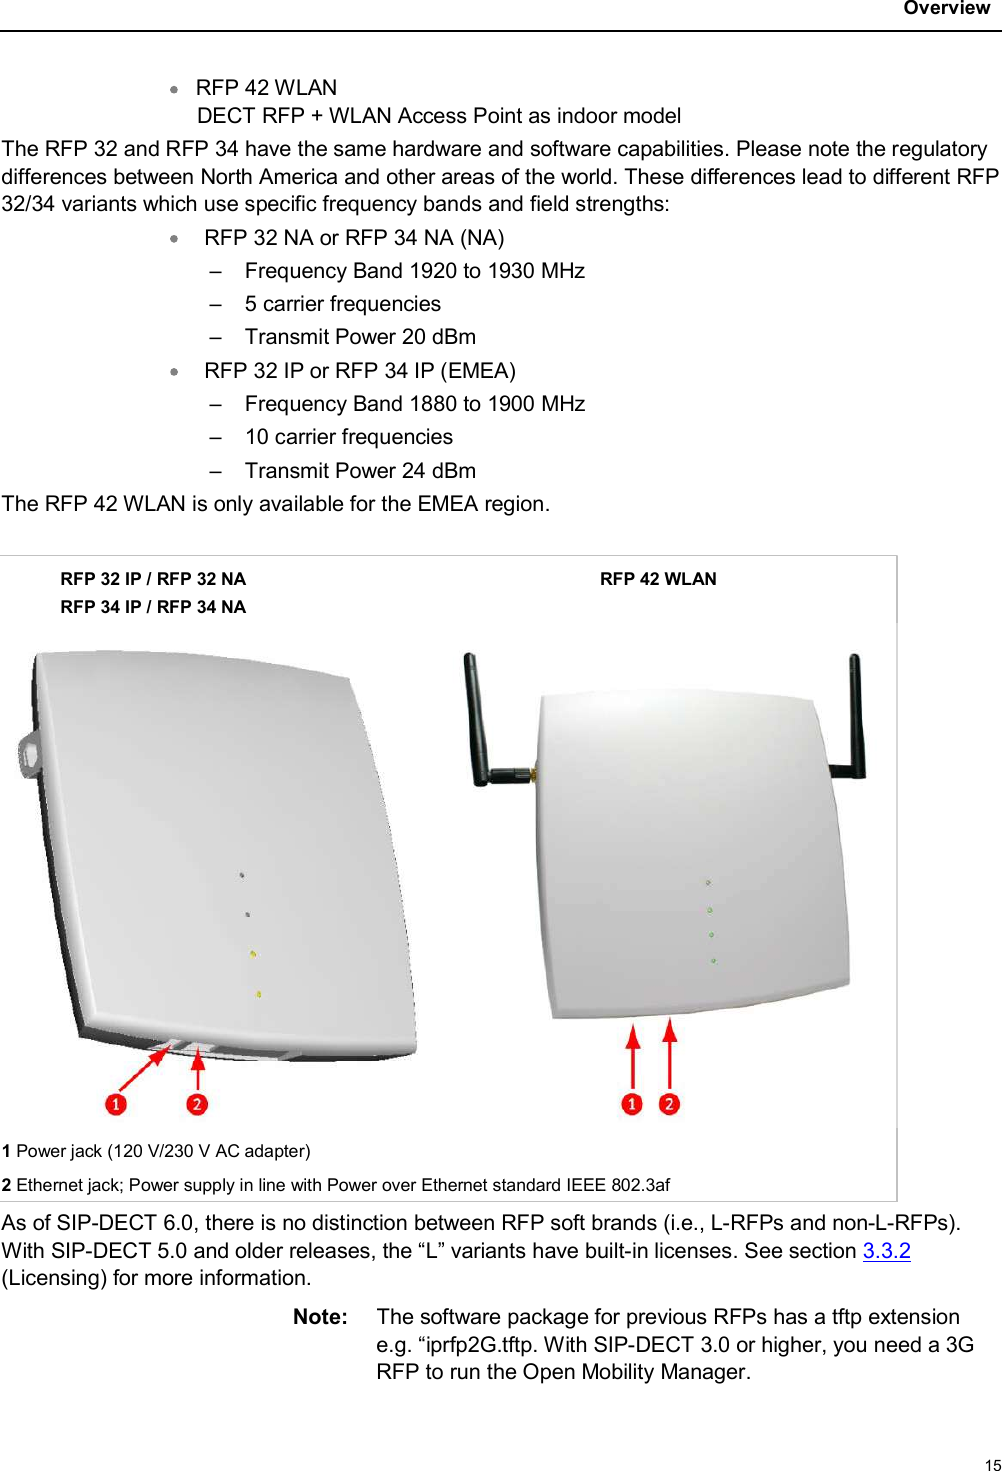 Overview15RFP 42 WLAN DECT RFP + WLAN Access Point as indoor model The RFP 32 and RFP 34 have the same hardware and software capabilities. Please note the regulatory differences between North America and other areas of the world. These differences lead to different RFP 32/34 variants which use specific frequency bands and field strengths: RFP 32 NA or RFP 34 NA (NA) – Frequency Band 1920 to 1930 MHz – 5 carrier frequencies – Transmit Power 20 dBm RFP 32 IP or RFP 34 IP (EMEA) – Frequency Band 1880 to 1900 MHz – 10 carrier frequencies – Transmit Power 24 dBm The RFP 42 WLAN is only available for the EMEA region.             RFP 32 IP / RFP 32 NA            RFP 34 IP / RFP 34 NA                              RFP 42 WLAN1Power jack (120 V/230 V AC adapter)2Ethernet jack; Power supply in line with Power over Ethernet standard IEEE 802.3afAs of SIP-DECT 6.0, there is no distinction between RFP soft brands (i.e., L-RFPs and non-L-RFPs). With SIP-DECT 5.0 and older releases, the “L” variants have built-in licenses. See section 3.3.2(Licensing) for more information.Note: The software package for previous RFPs has a tftp extension e.g. “iprfp2G.tftp. With SIP-DECT 3.0 or higher, you need a 3G RFP to run the Open Mobility Manager.